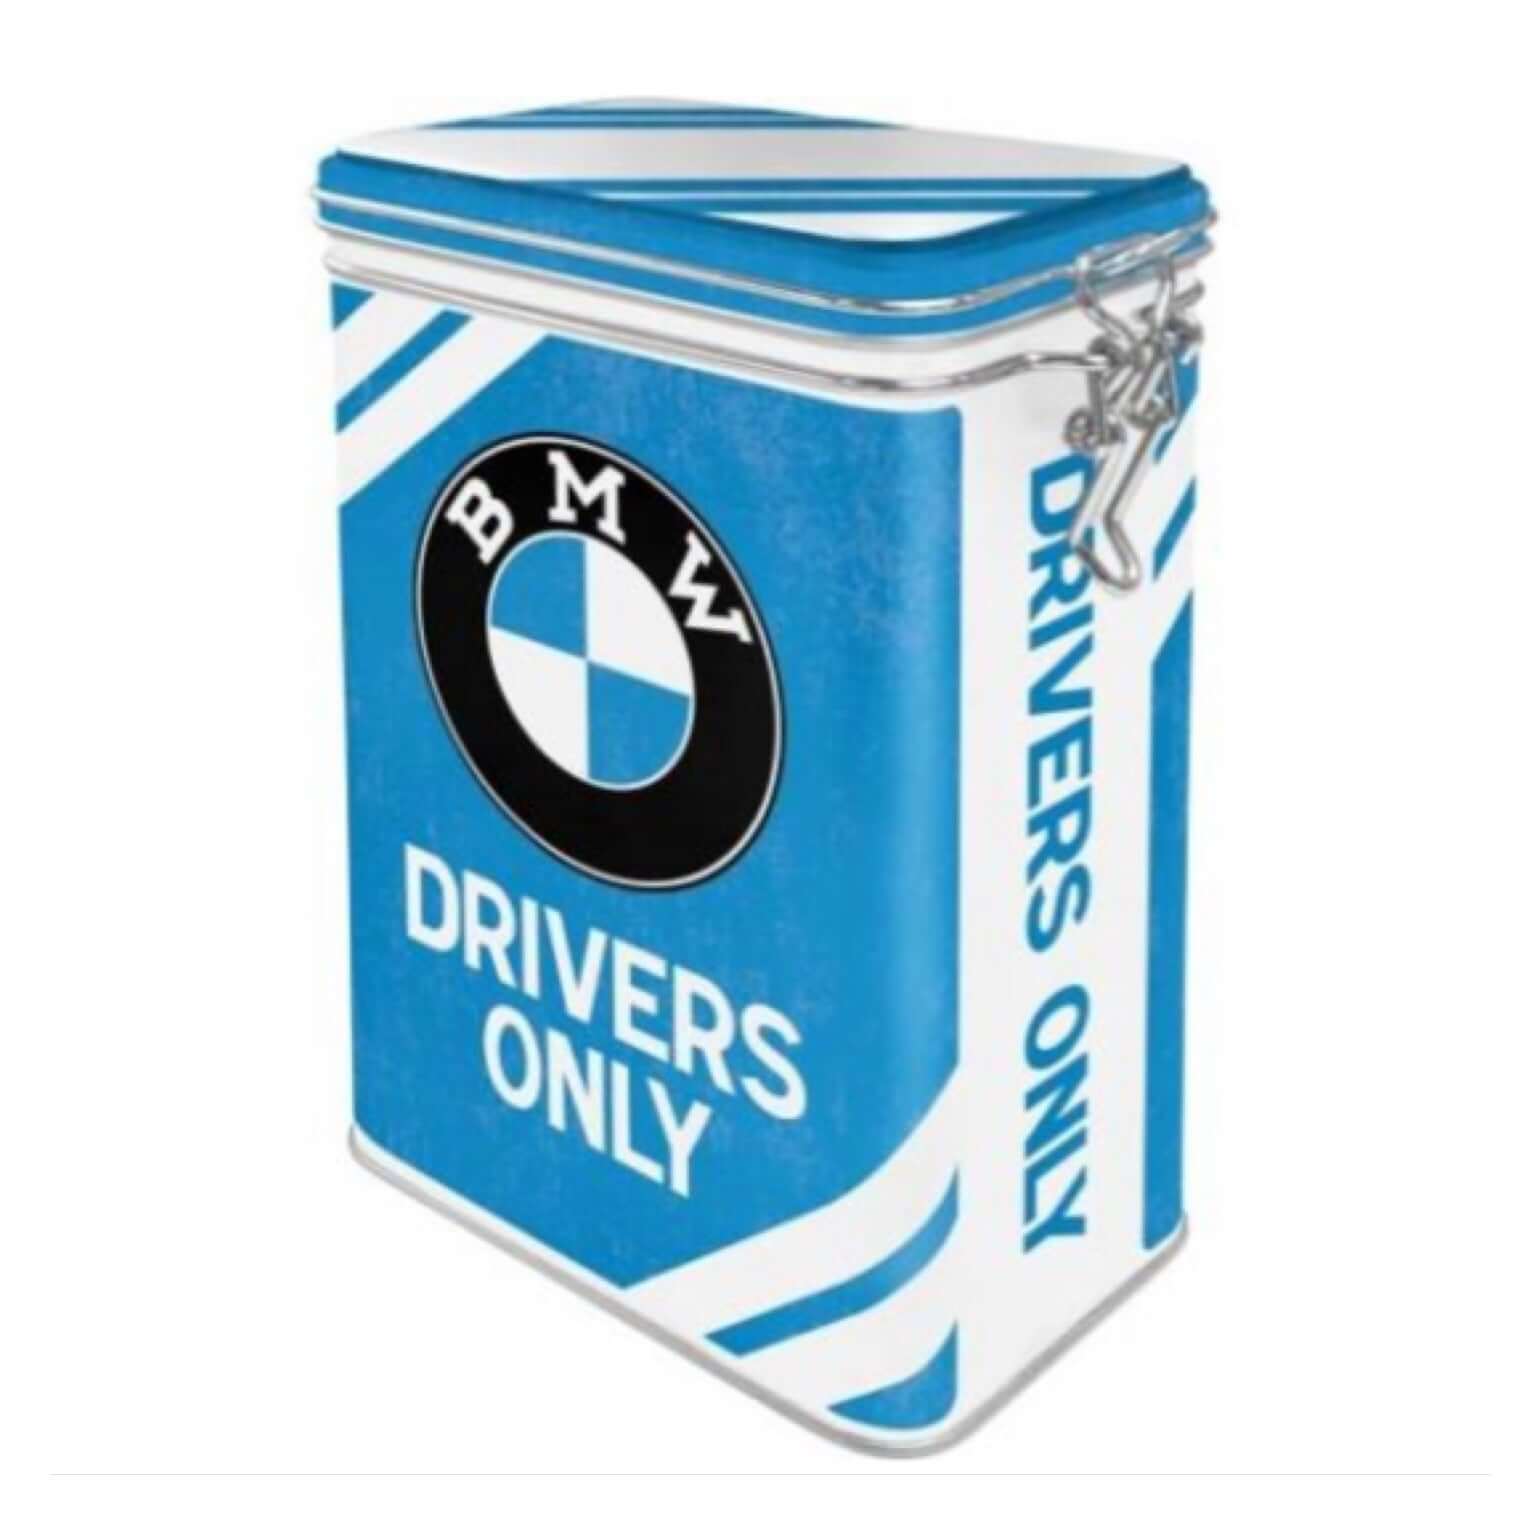 Box Tin Container BMW Drivers Only Vintage Retro - The Renmy Store Homewares & Gifts 